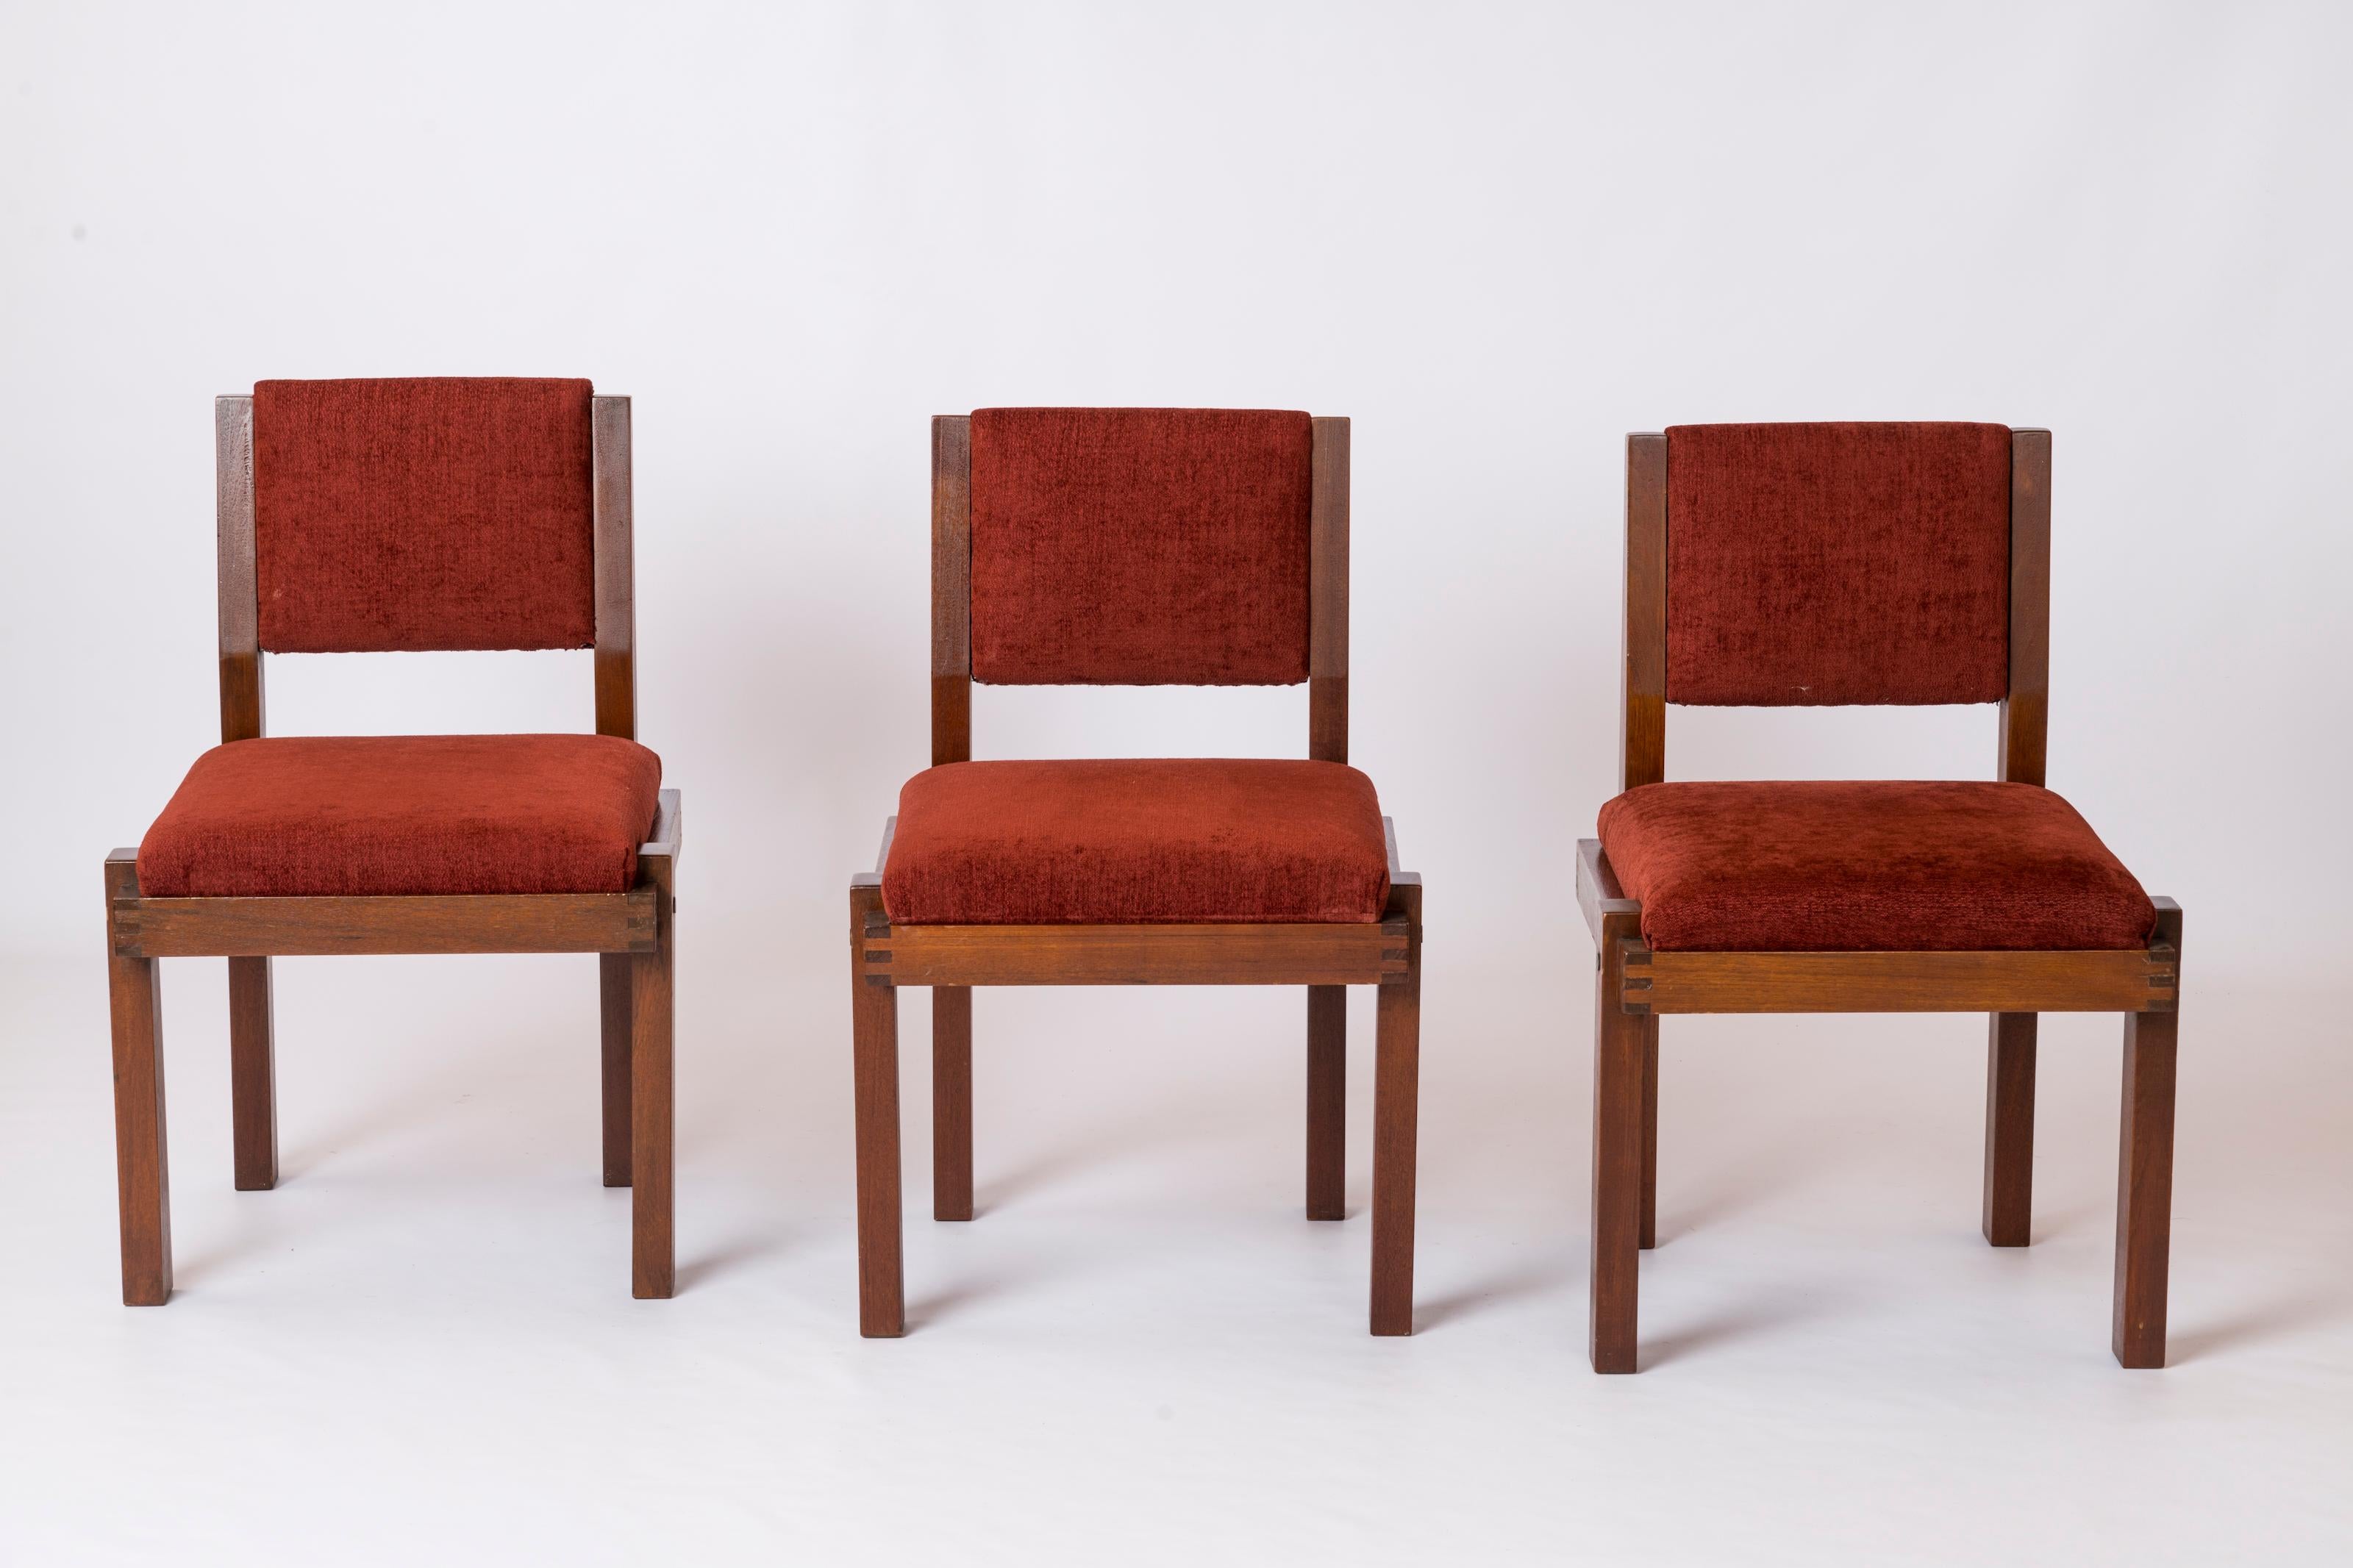 Late 20th Century Six Modernist Solid Mahogany and Bordeaux Upholstery Chairs - France 1970's For Sale